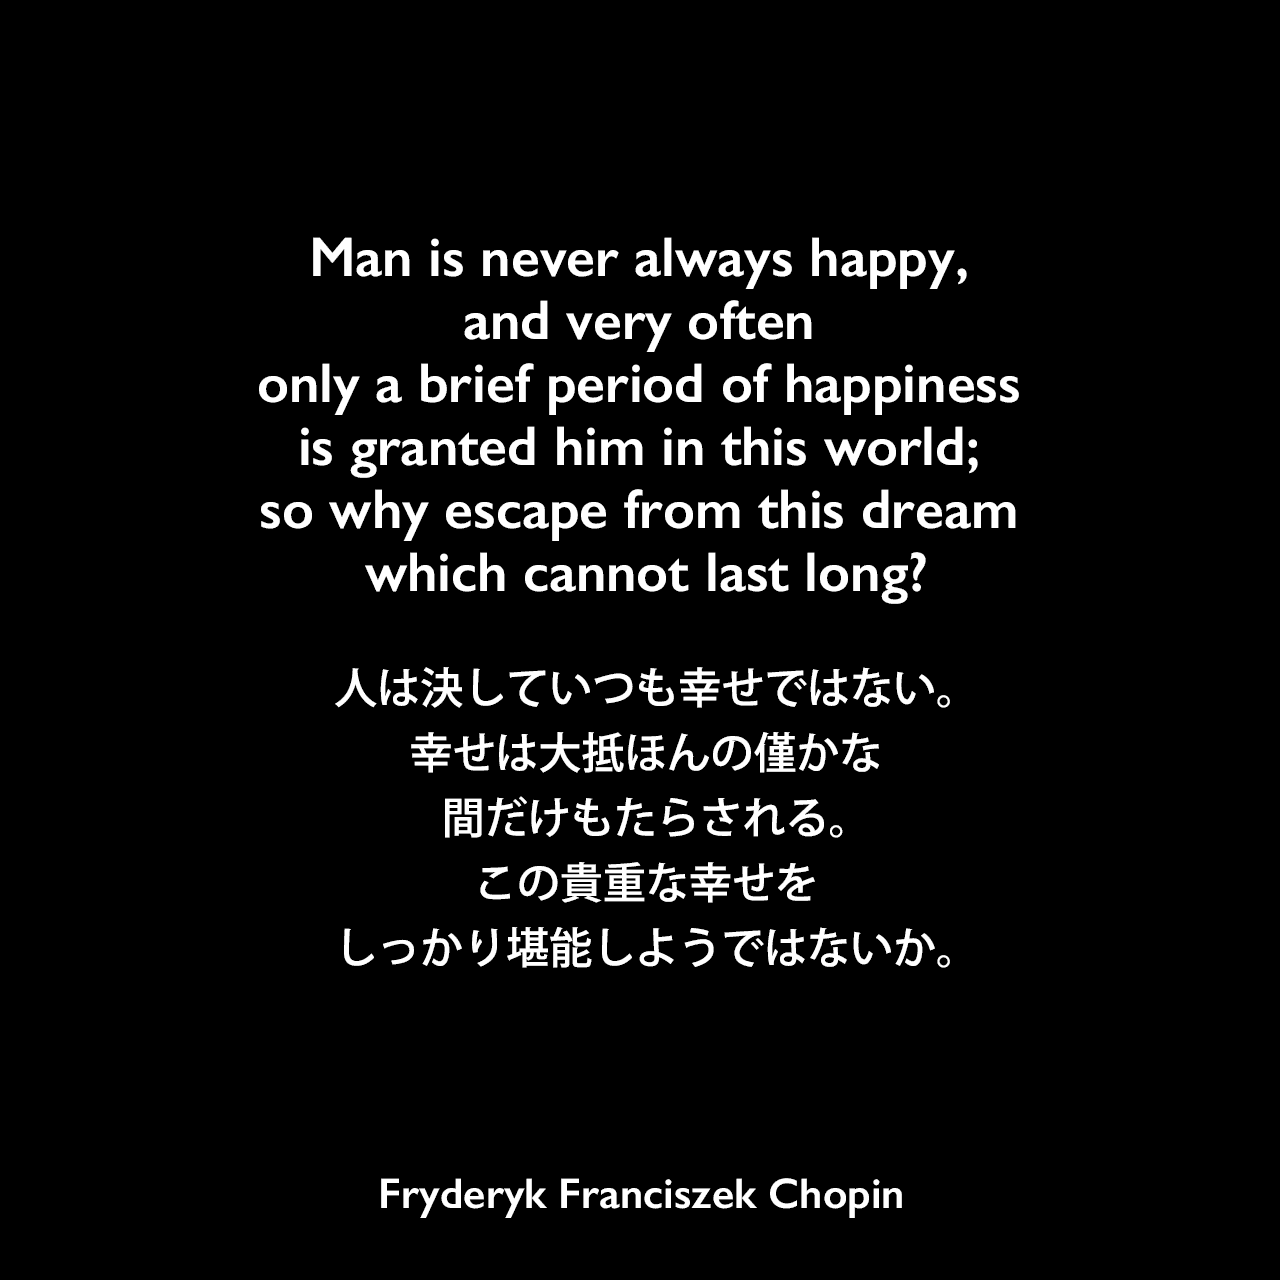 Man is never always happy, and very often only a brief period of happiness is granted him in this world; so why escape from this dream which cannot last long?人は決していつも幸せではない。幸せは大抵ほんの僅かな間だけもたらされる。この貴重な幸せをしっかり堪能しようではないか。Fryderyk Franciszek Chopin